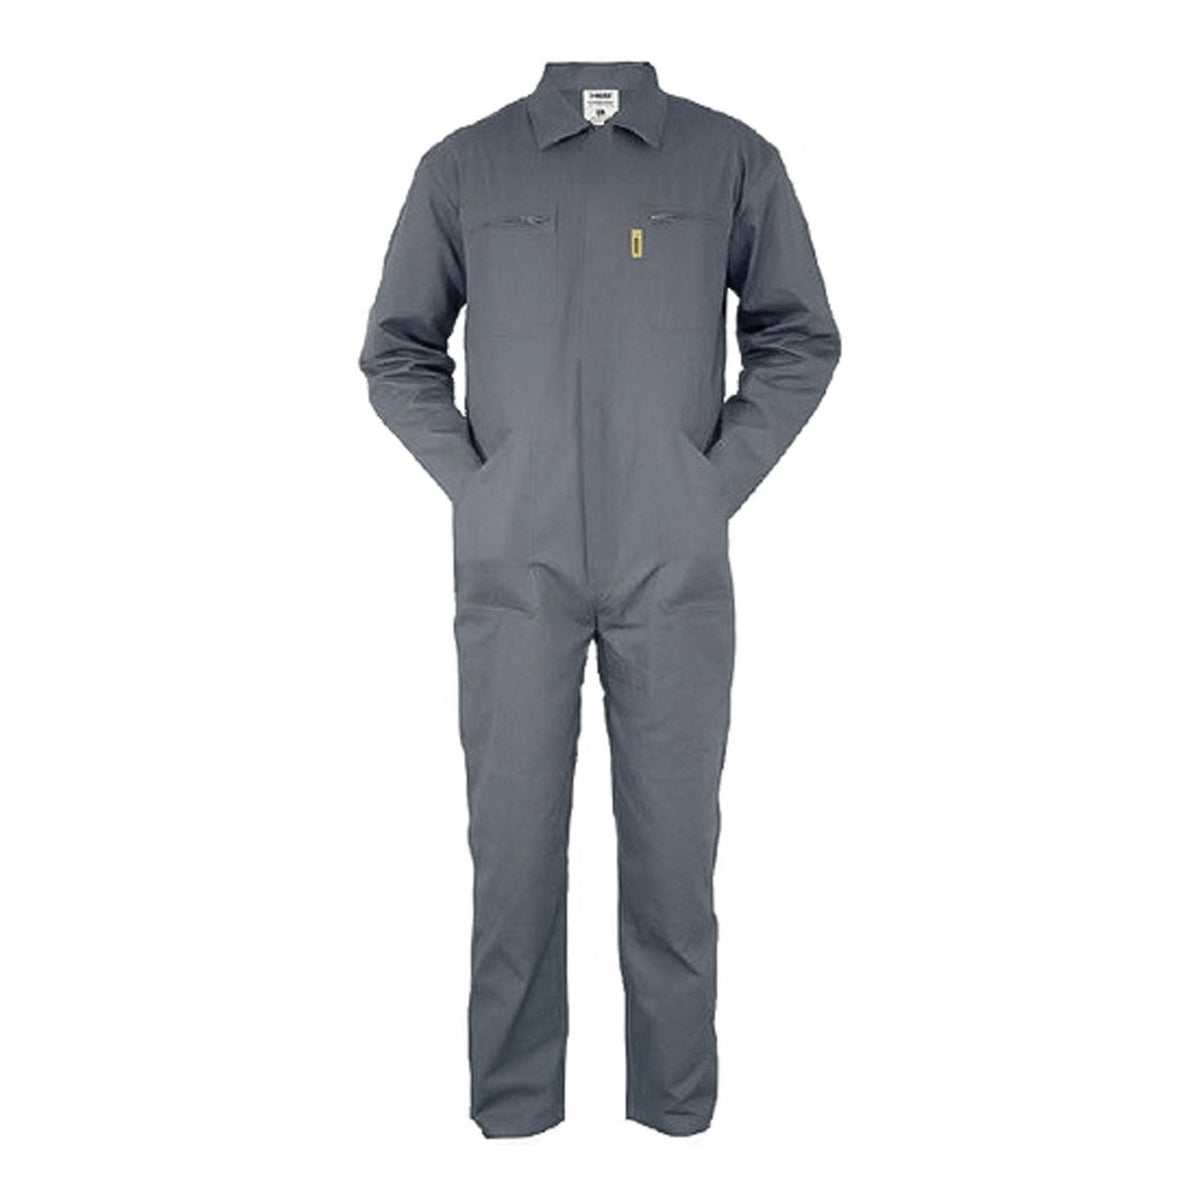 SGS Grey Complete Work Wear Coverall - SGS703 | Supply Master | Accra, Ghana Safety Clothing Buy Tools hardware Building materials